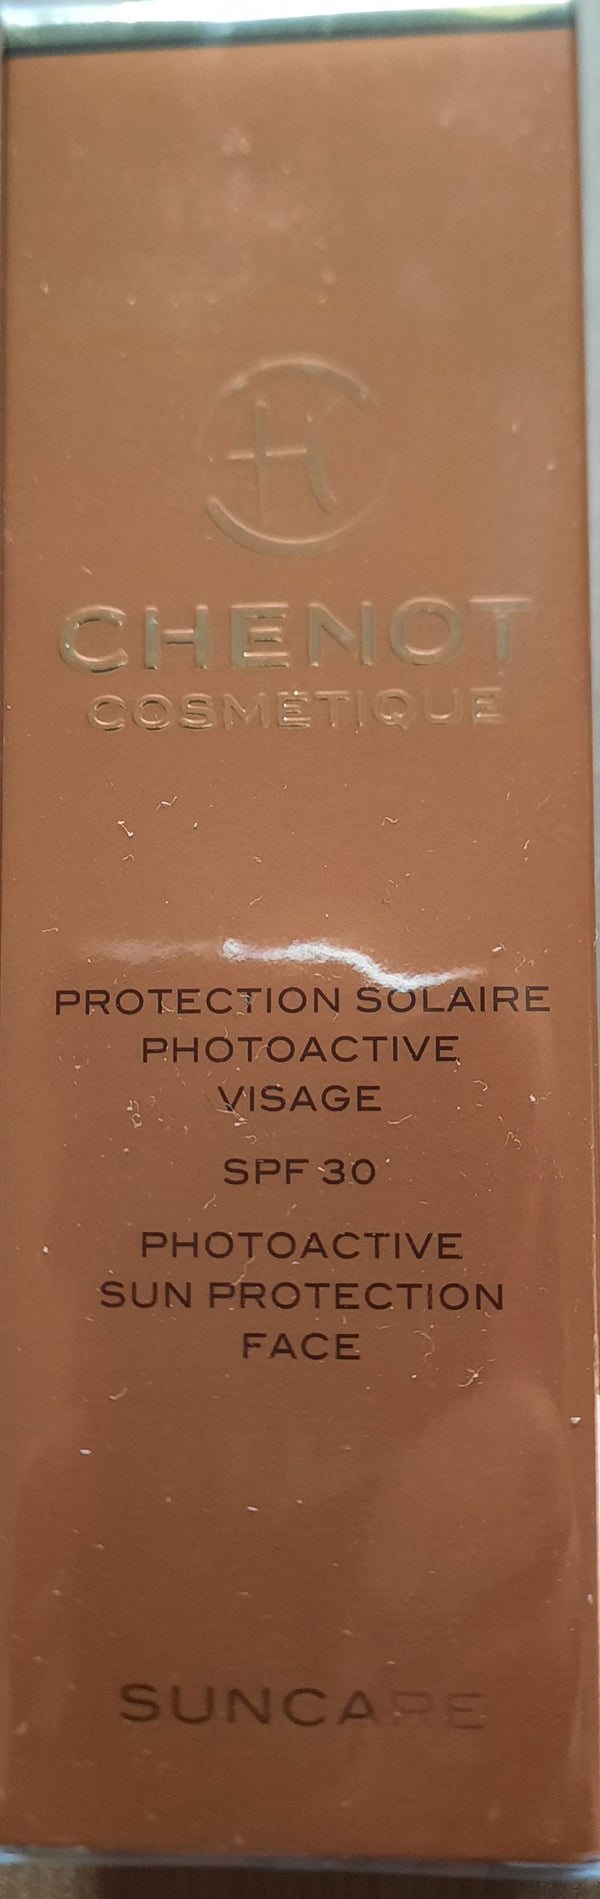 CHENOT SUNCARE PROTECTION SOLAIRE PHOTOACTIVE VISAGE SPF30 50ML